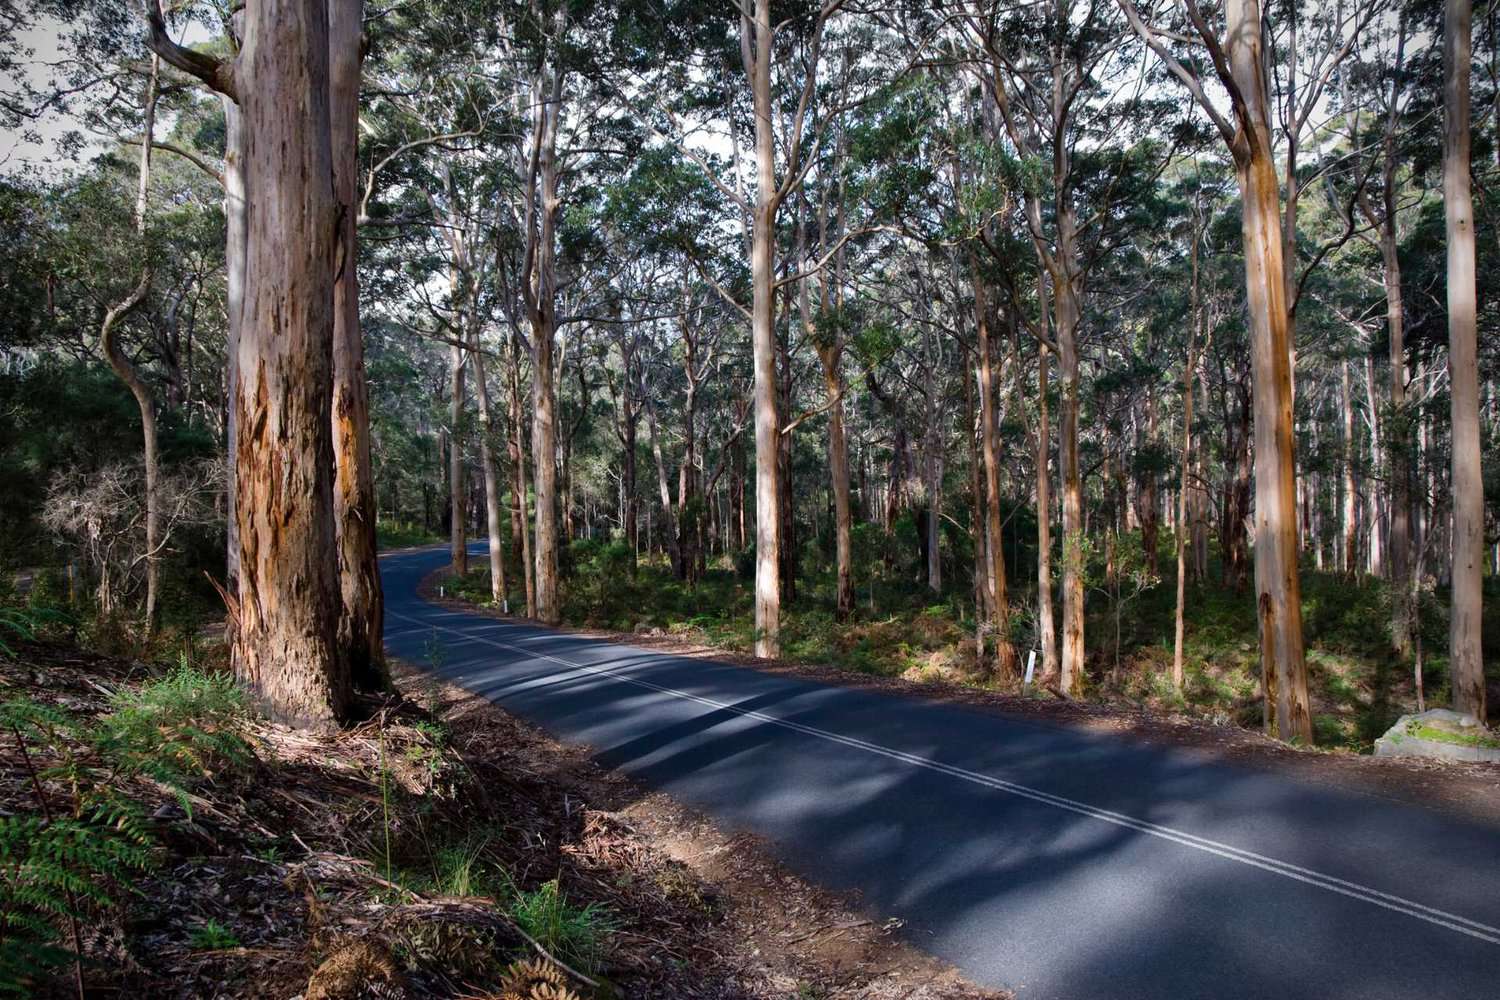 Sunlight filtering through the tall eucalyptus trees onto the curving road in Boranup Forest, inviting exploration.